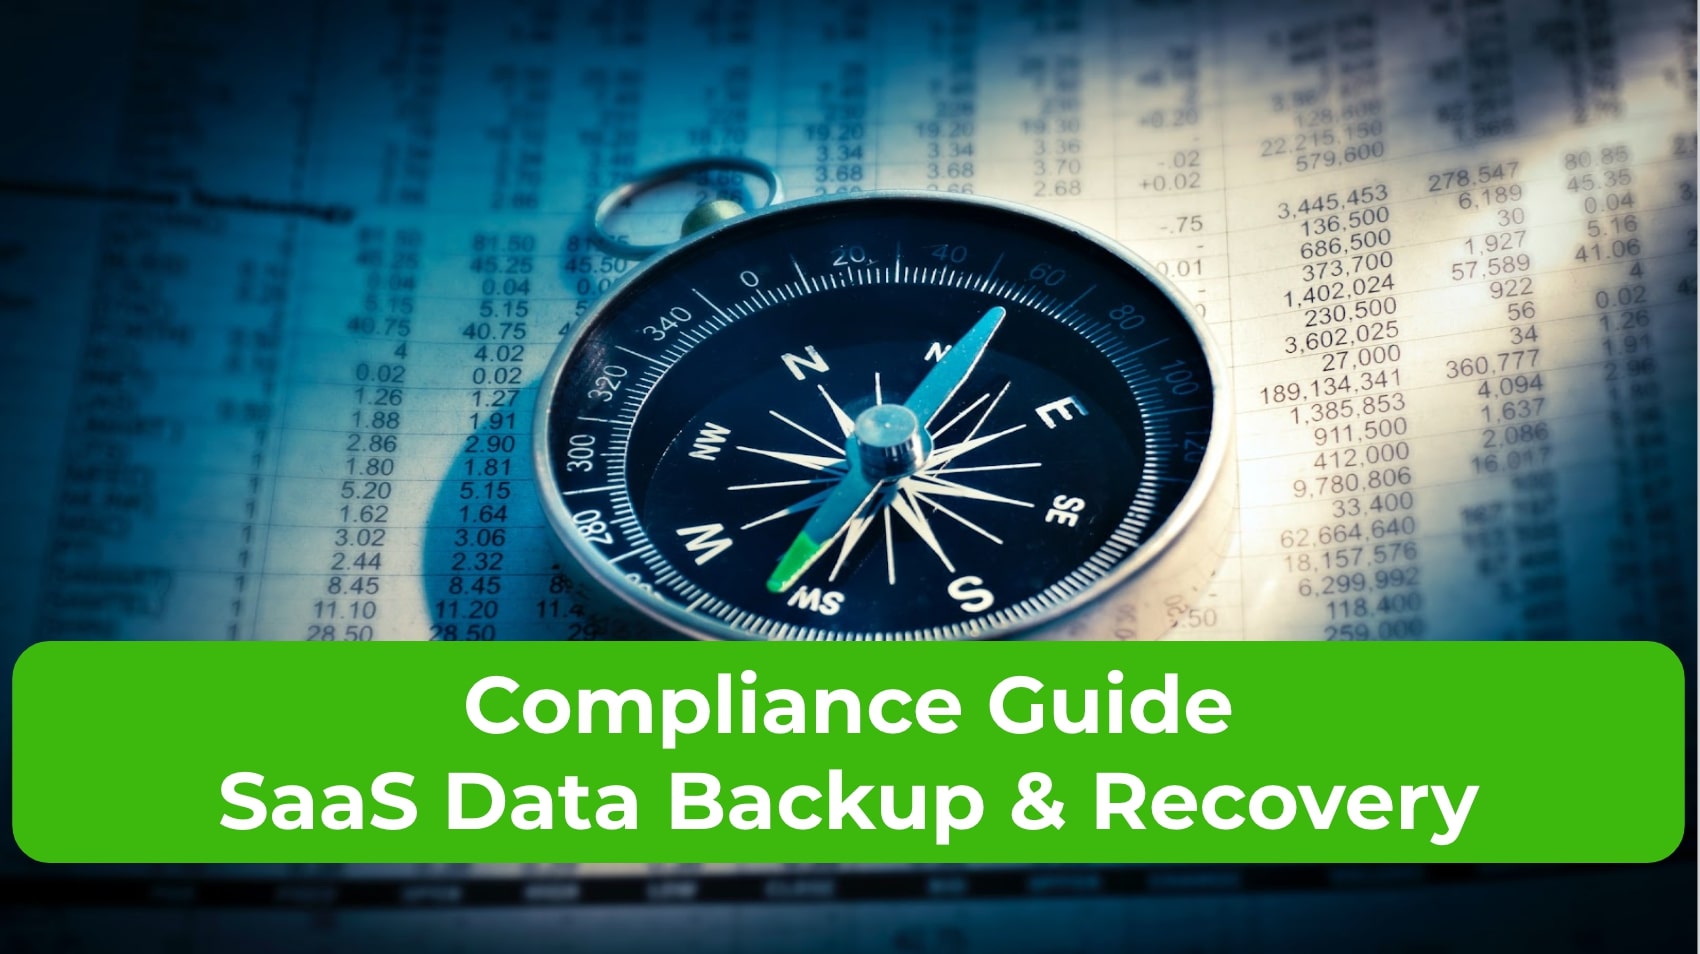 Compliance Guide SaaS Data Backup & Recovery